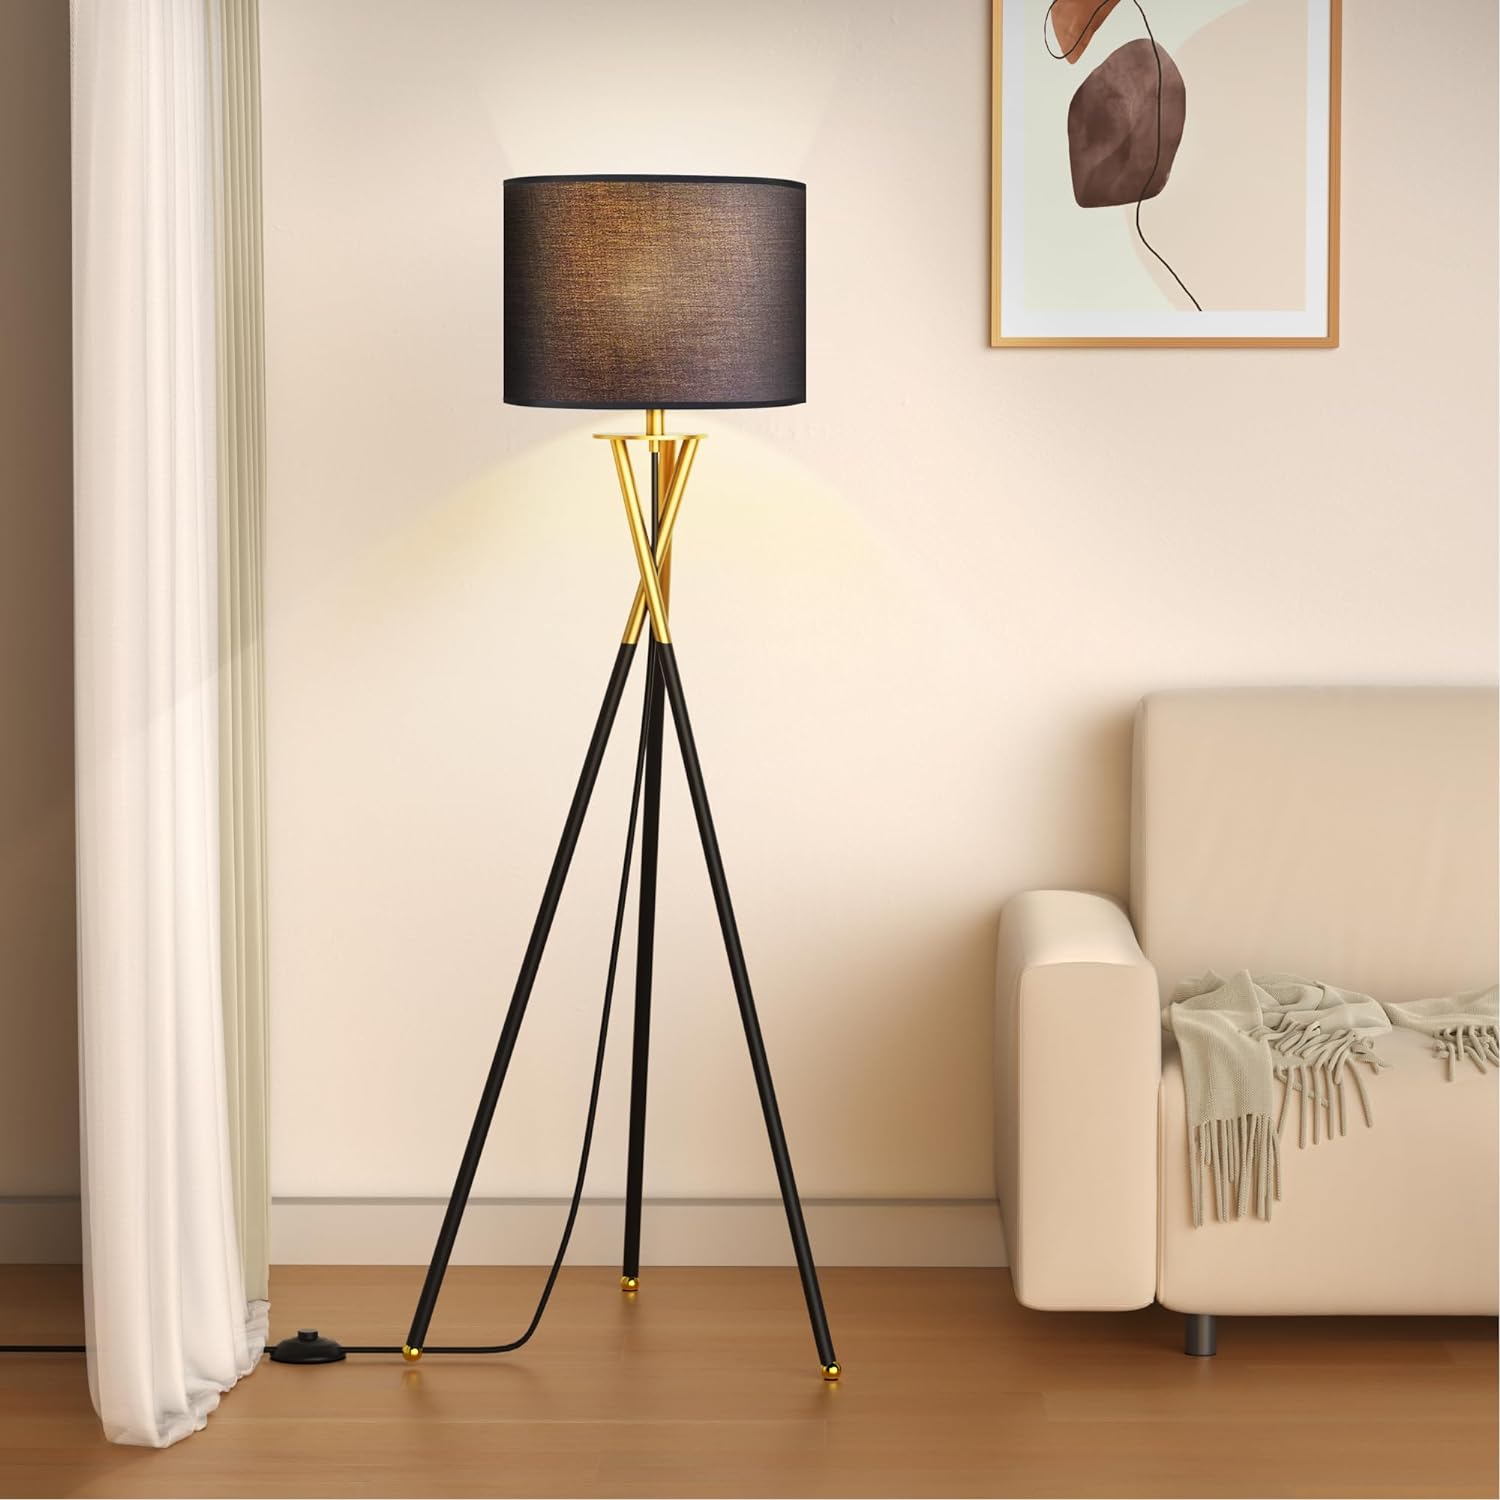 Capon Tripod Floor Lamp for Living Room, Tall Standing Lamp with E26 Bulbs, Beige/Black Linen Shade and 3 Color Temperatures, Ideal for Bedroom, Office, Classroom, Dorm Room and Study Room